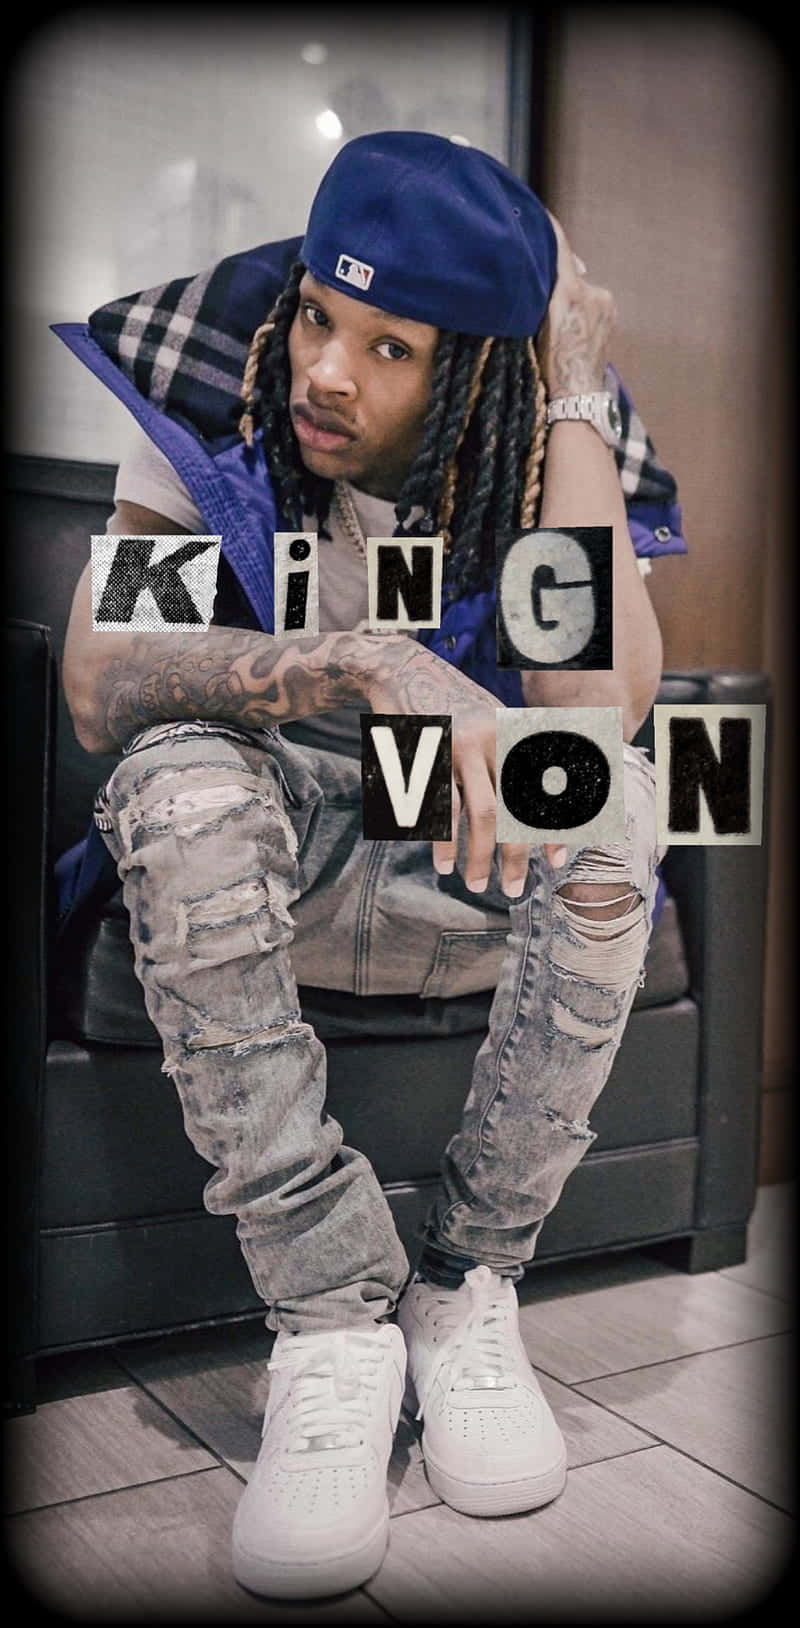 Up-close and personal with King Von